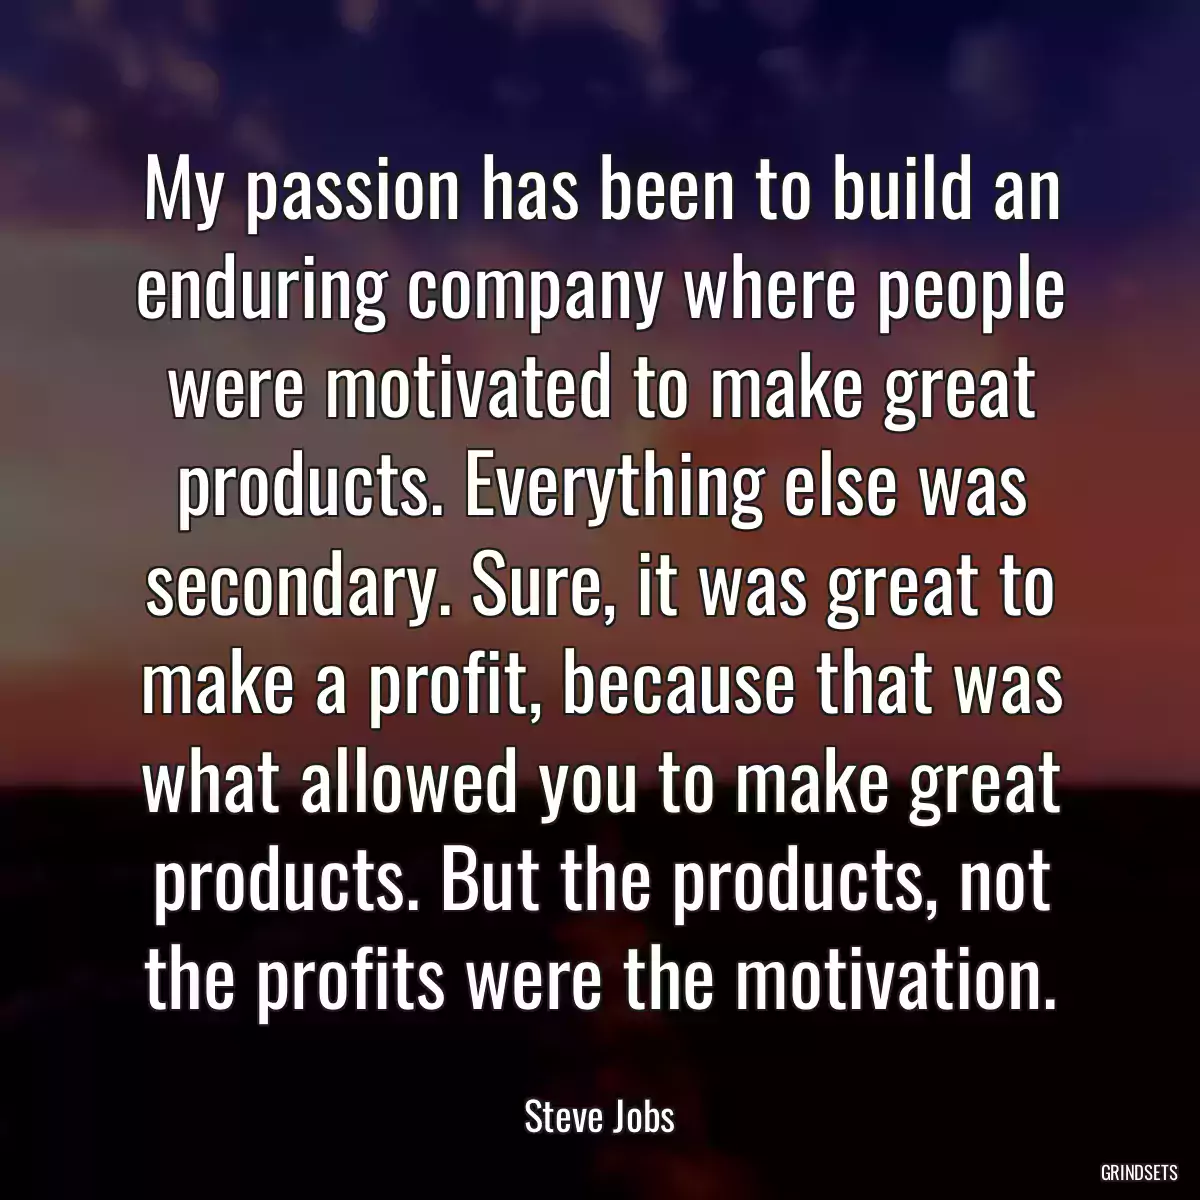 My passion has been to build an enduring company where people were motivated to make great products. Everything else was secondary. Sure, it was great to make a profit, because that was what allowed you to make great products. But the products, not the profits were the motivation.